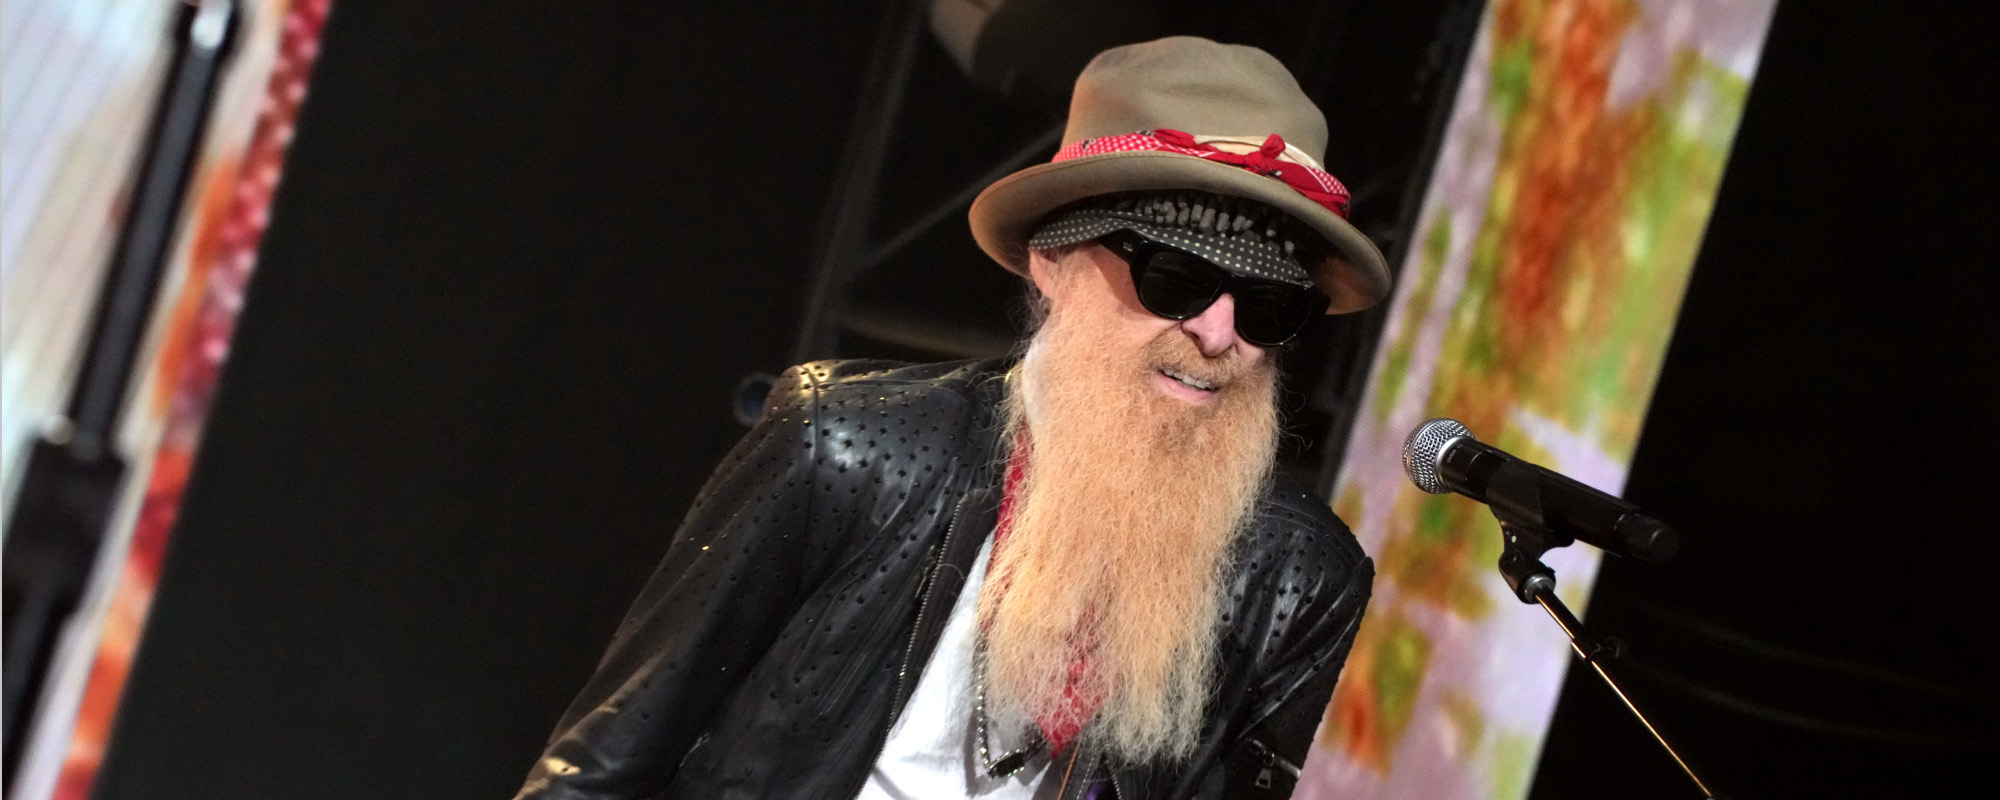 ZZ Top’s Billy Gibbons Plots “Birthday Jam” Concerts at L.A.’s Troubadour in December